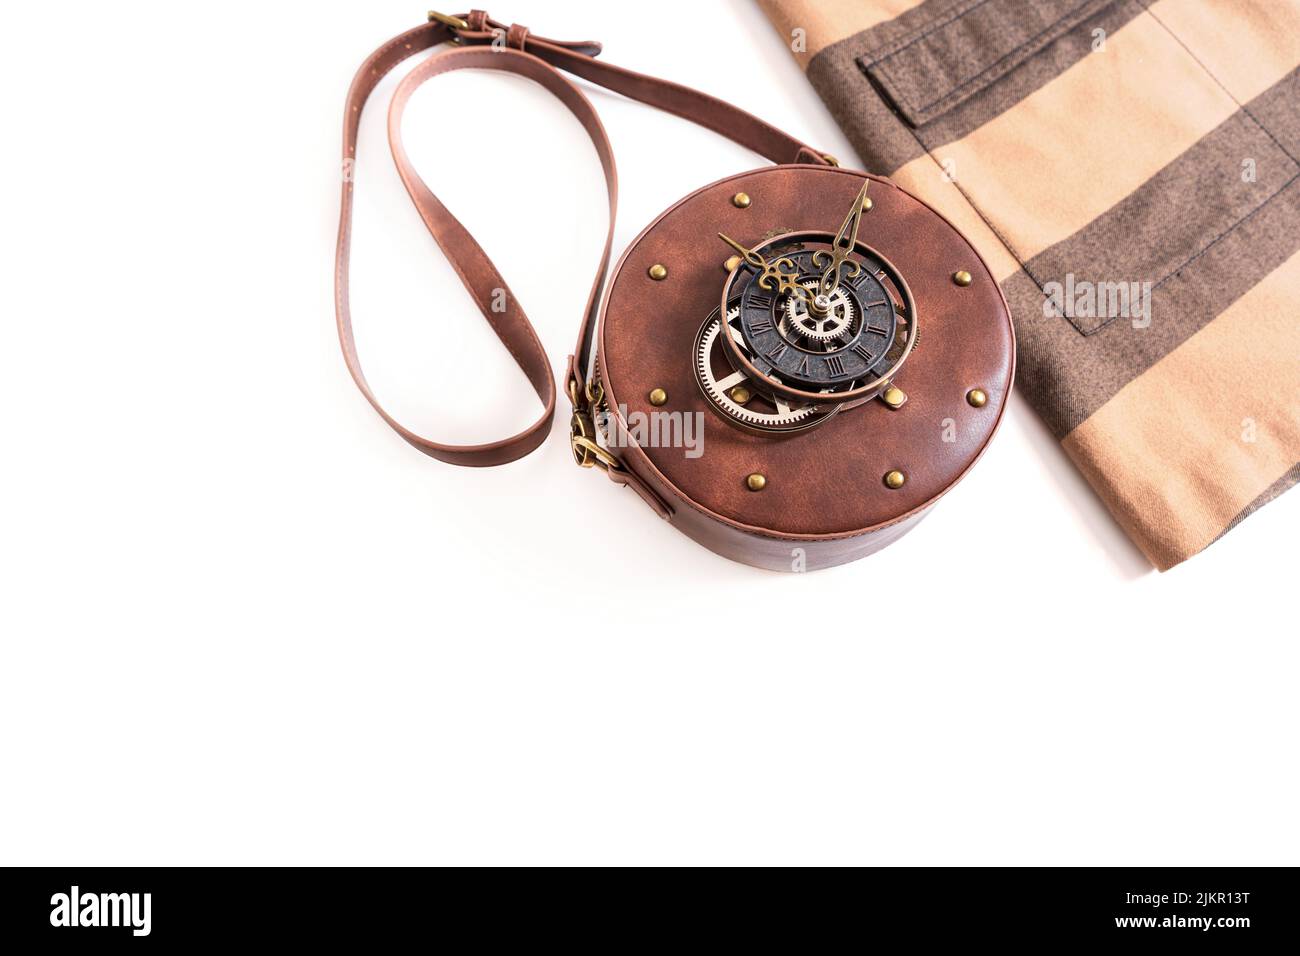 Dress and a steampunk style leather circle bag with rivets and a clock mechanism isolated on white background with copy space. Stock Photo